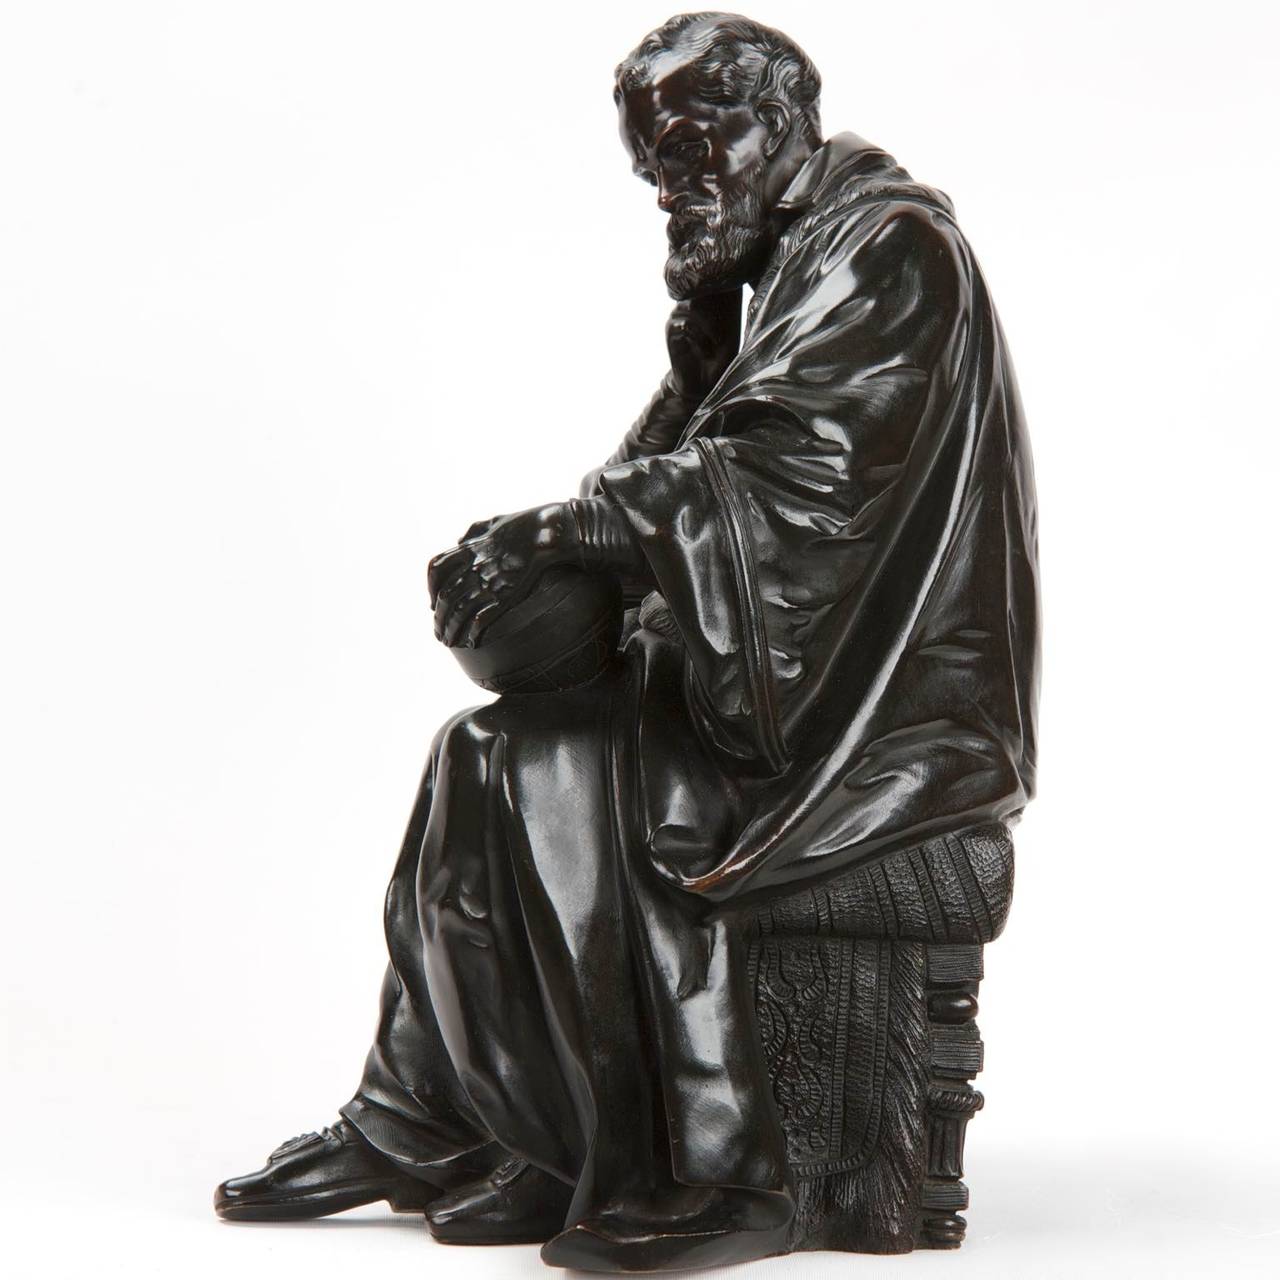 This exceptional antique French bronze sculpture captures the astronomer Galileo surrounded by thick leather bound volumes tucked into the ornate bookshelf he leans upon, his brow furrowed and deep in though as he gazes deeply into the globe